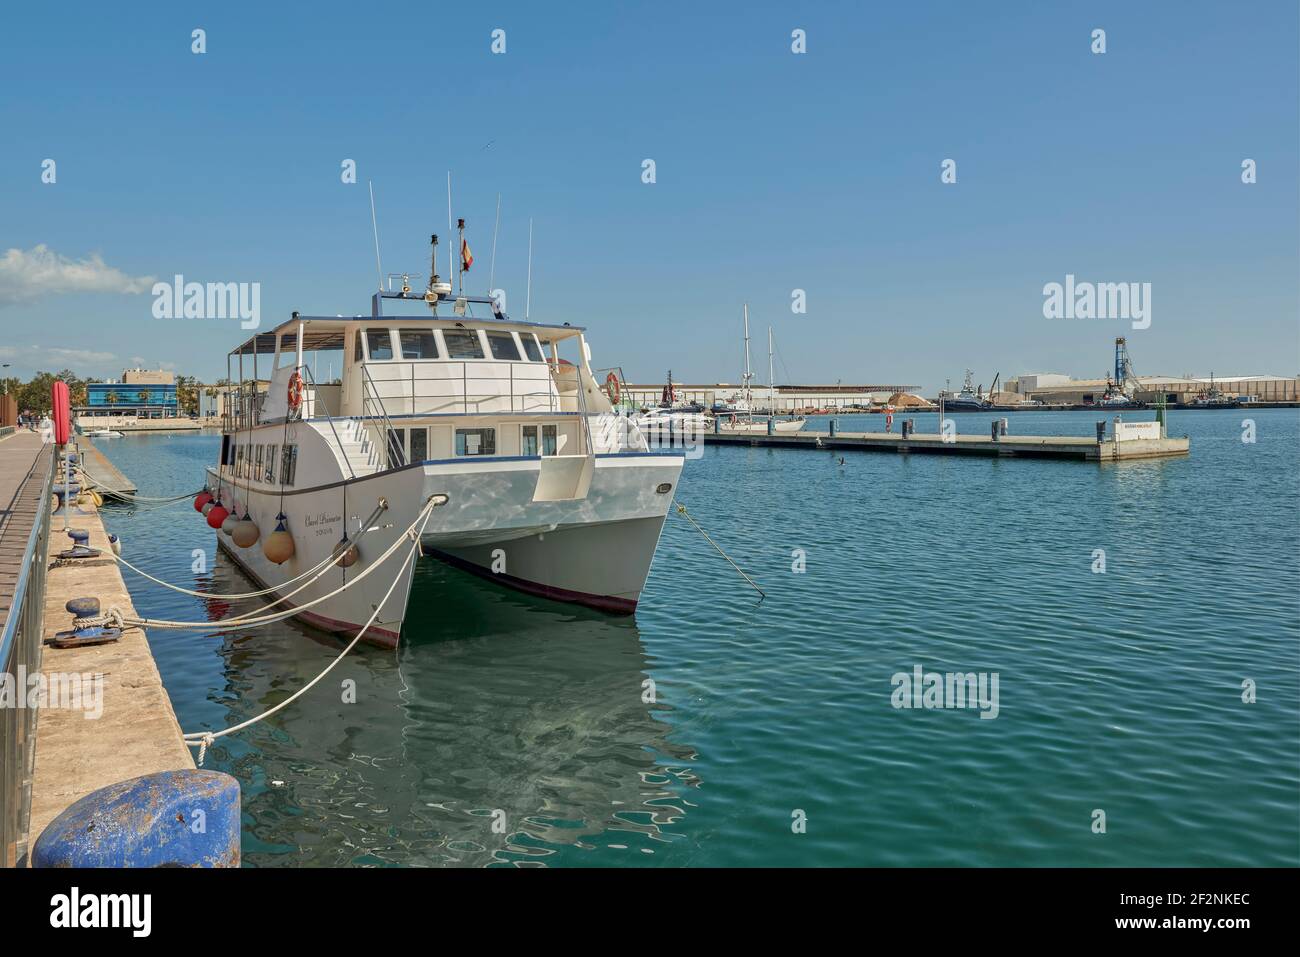 catamaran moored in the harbor, harbor of the Grao maritime district in the city of Castellon, Spain, Europe Stock Photo